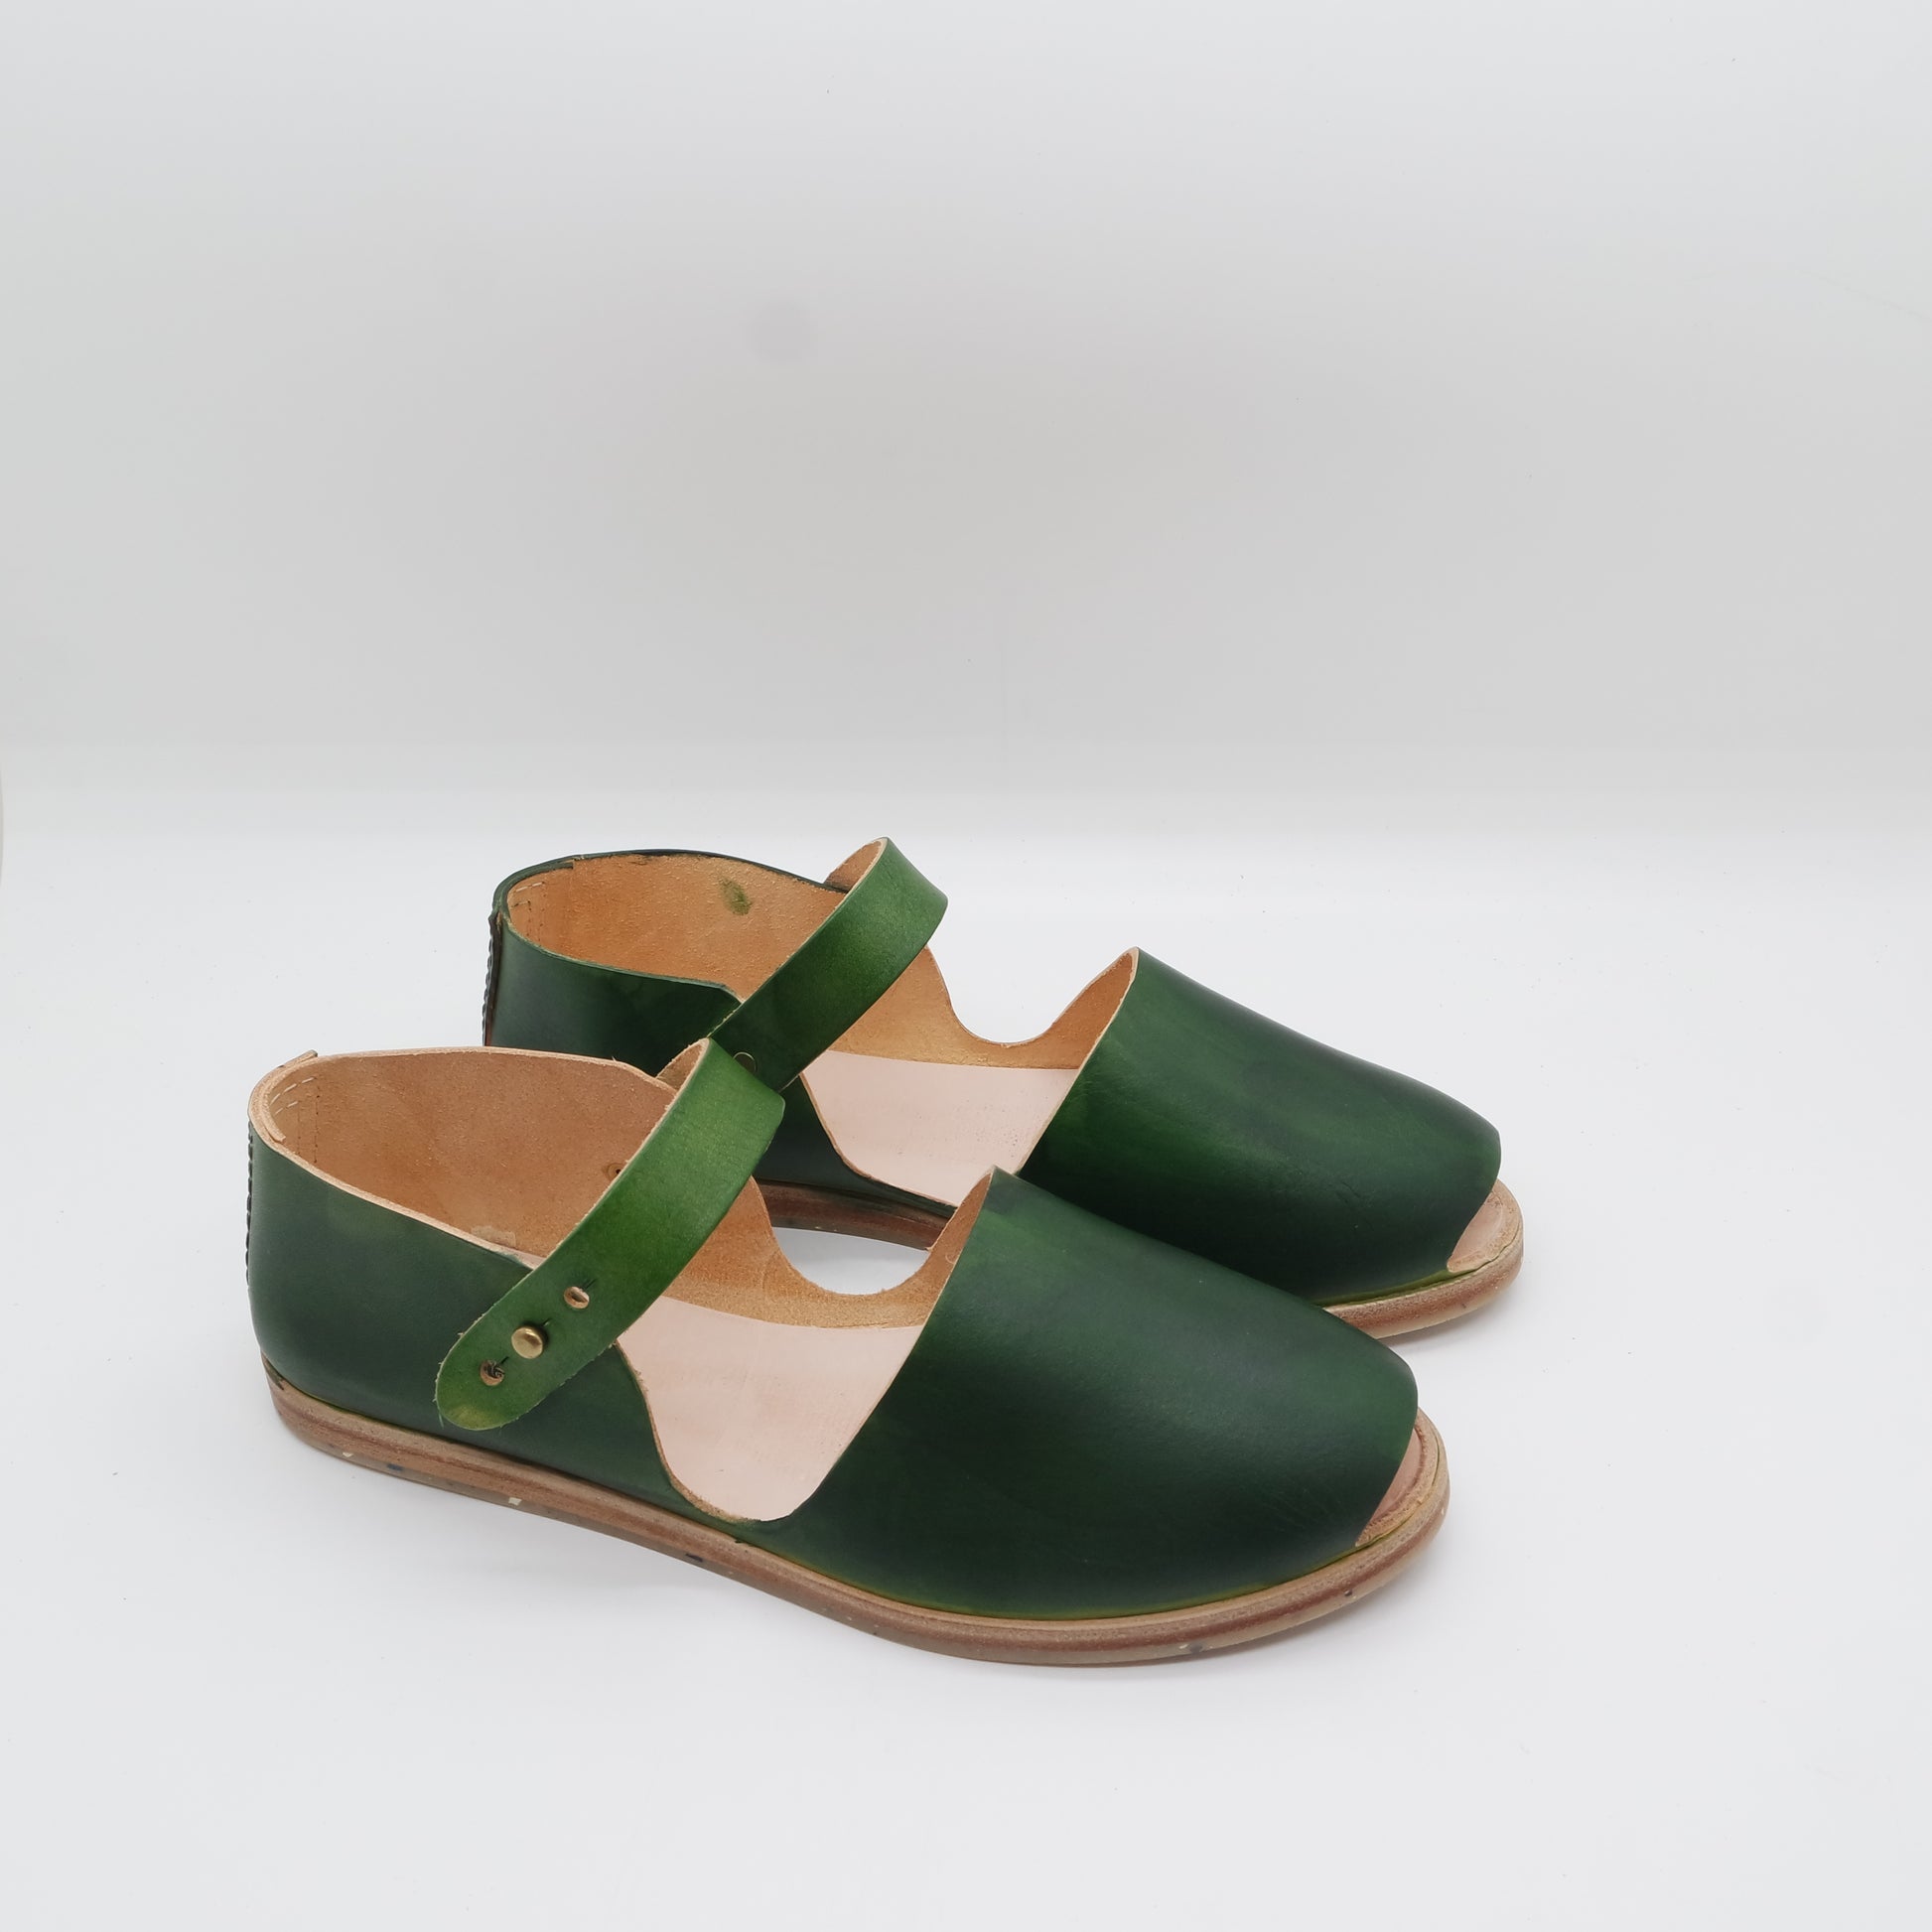 a pair of handmade green shoes on a white surface